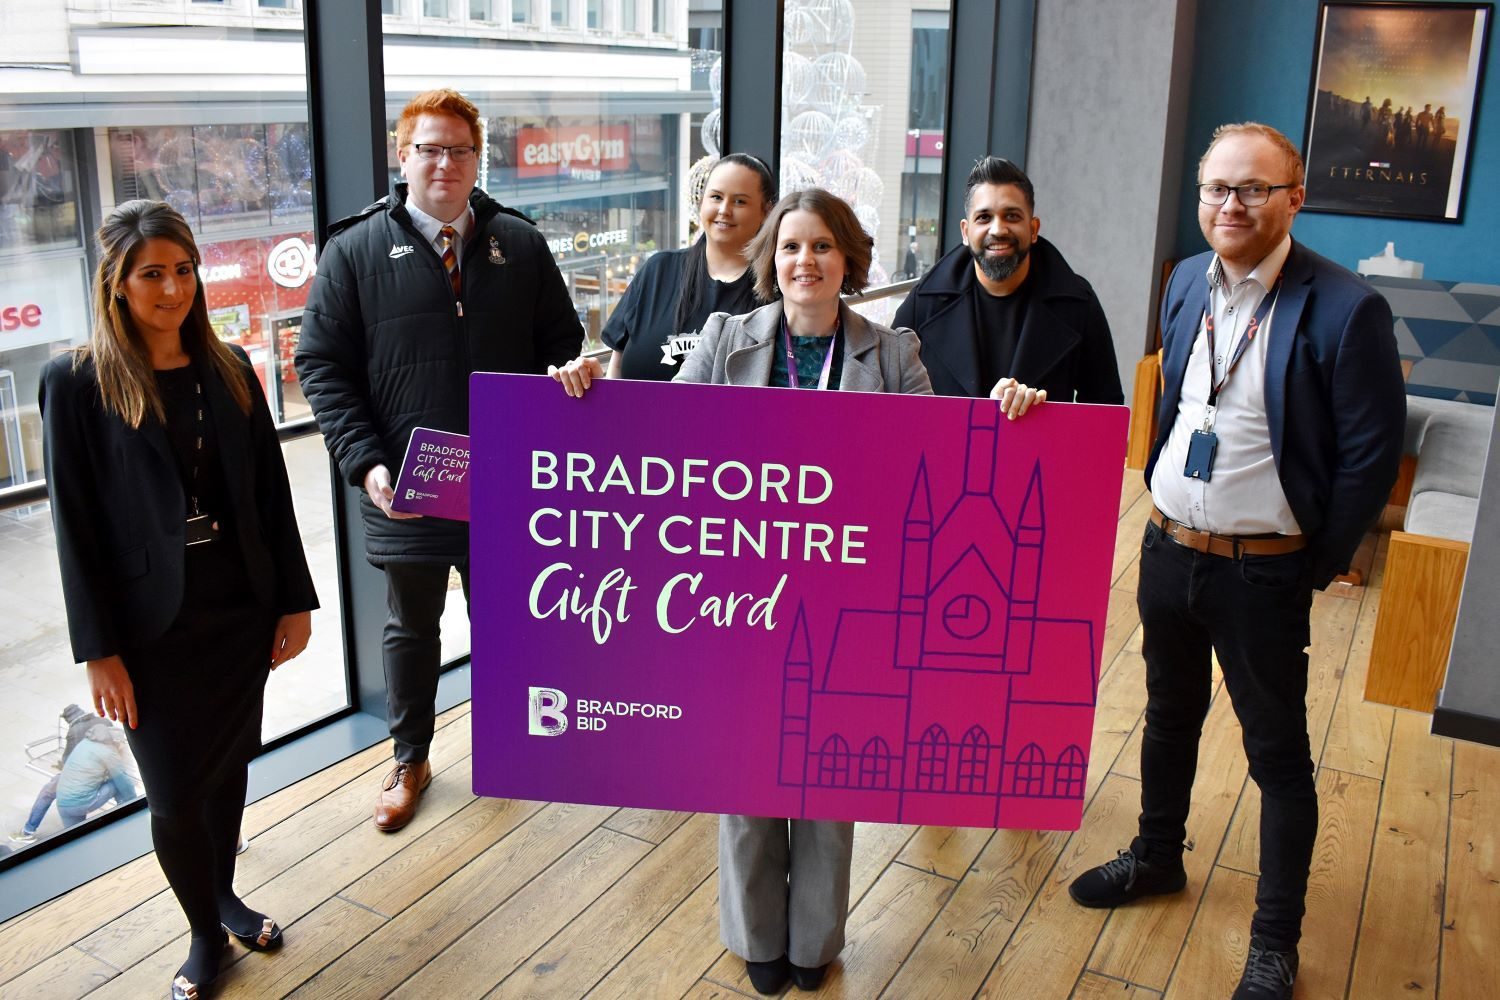 City centre gift card launches to boost Bradford…